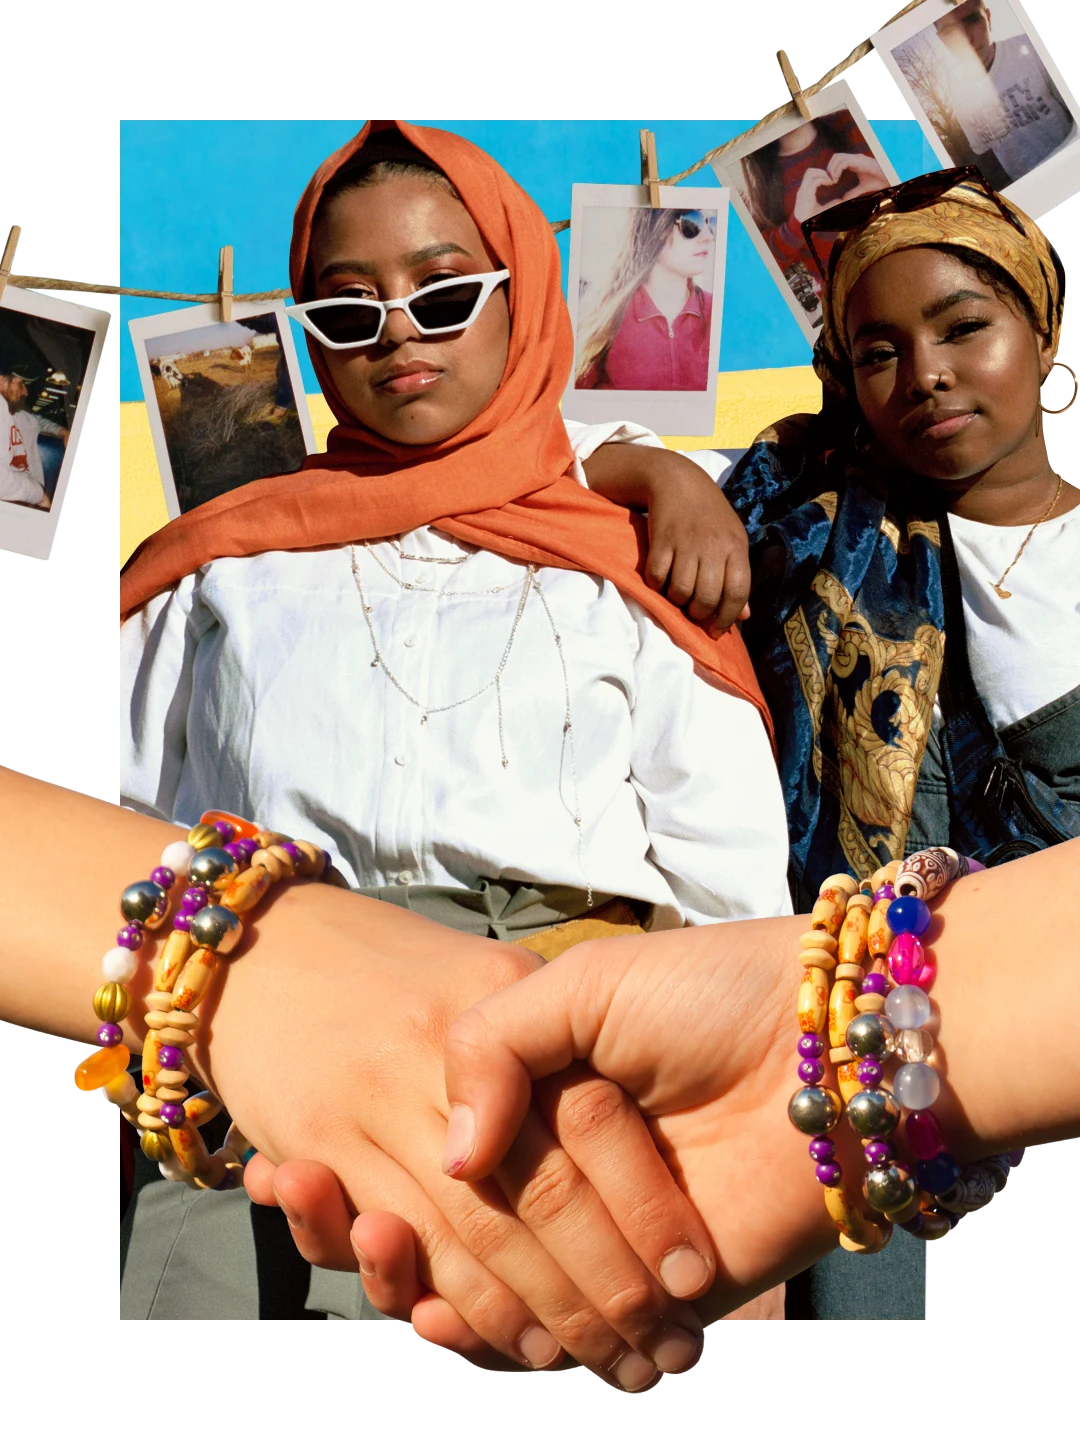 Hands with bracelets and rings slip into each other at the bottom. Instant photos on a clothesline at back against a blue and yellow background. Two Black women with head wraps at center, one leaning a hand on the other’s shoulder.
